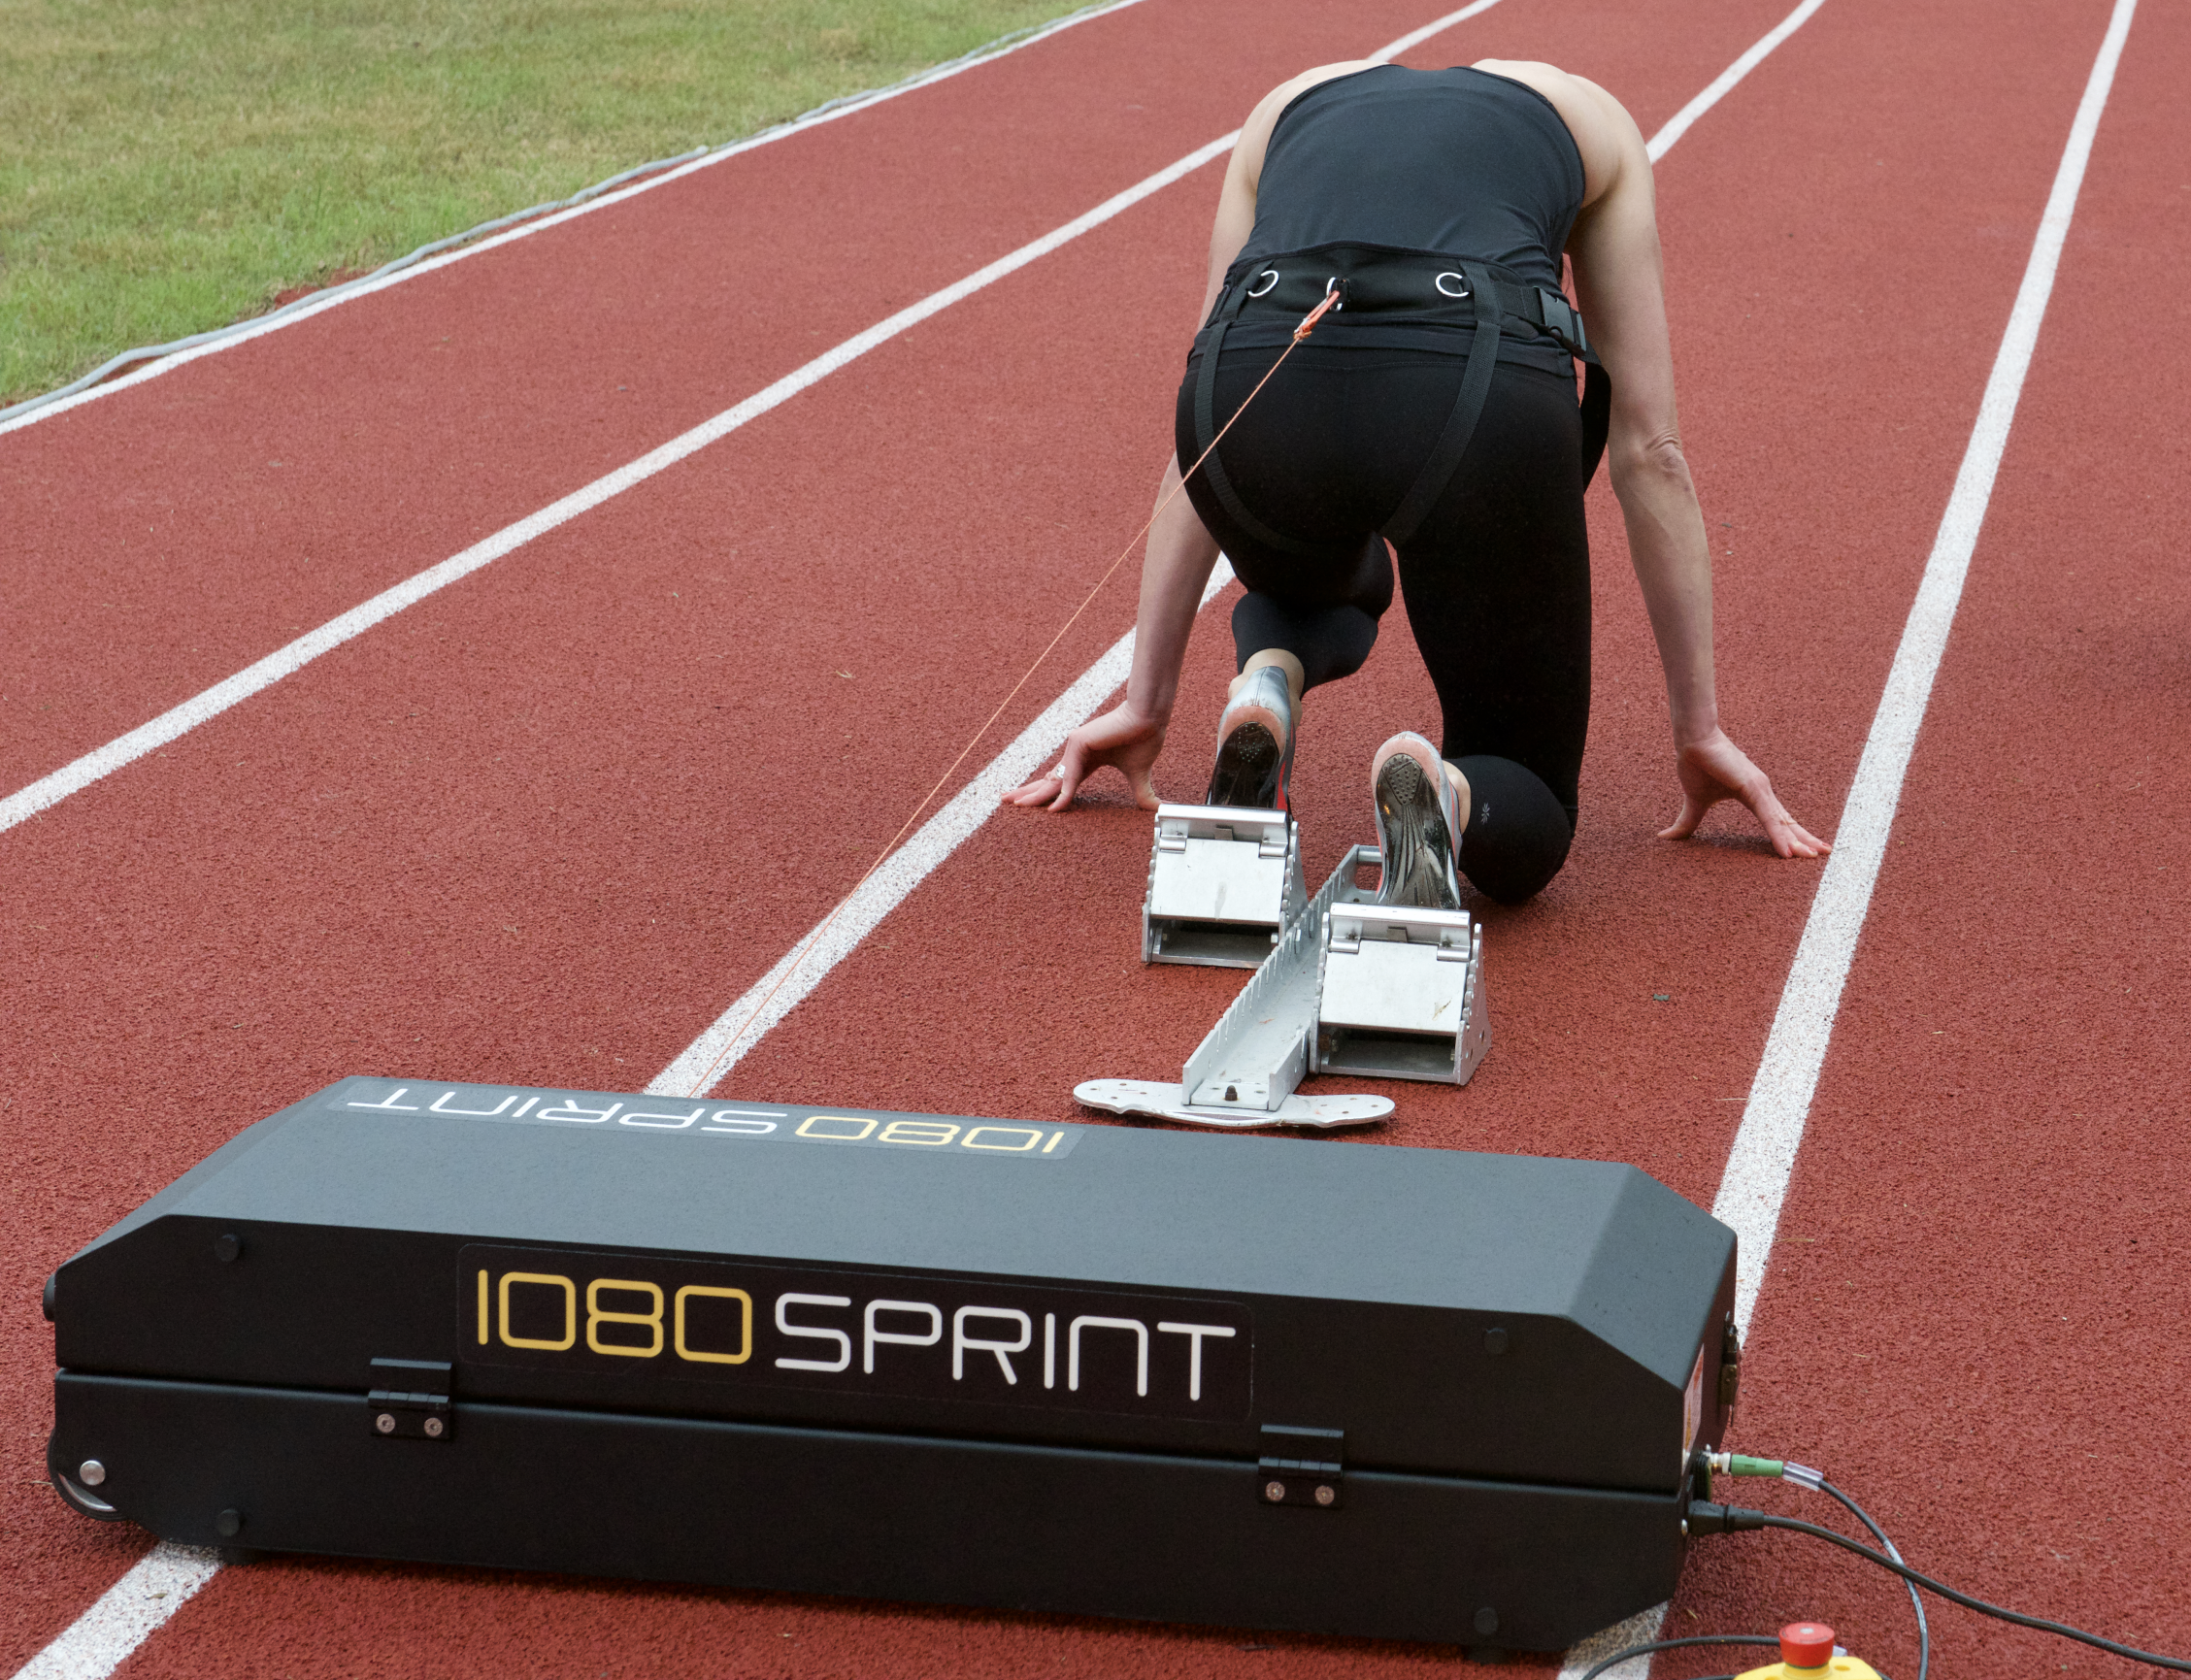 Resisted and assisted sprinting for post-activation potentiation with 1080 Sprint